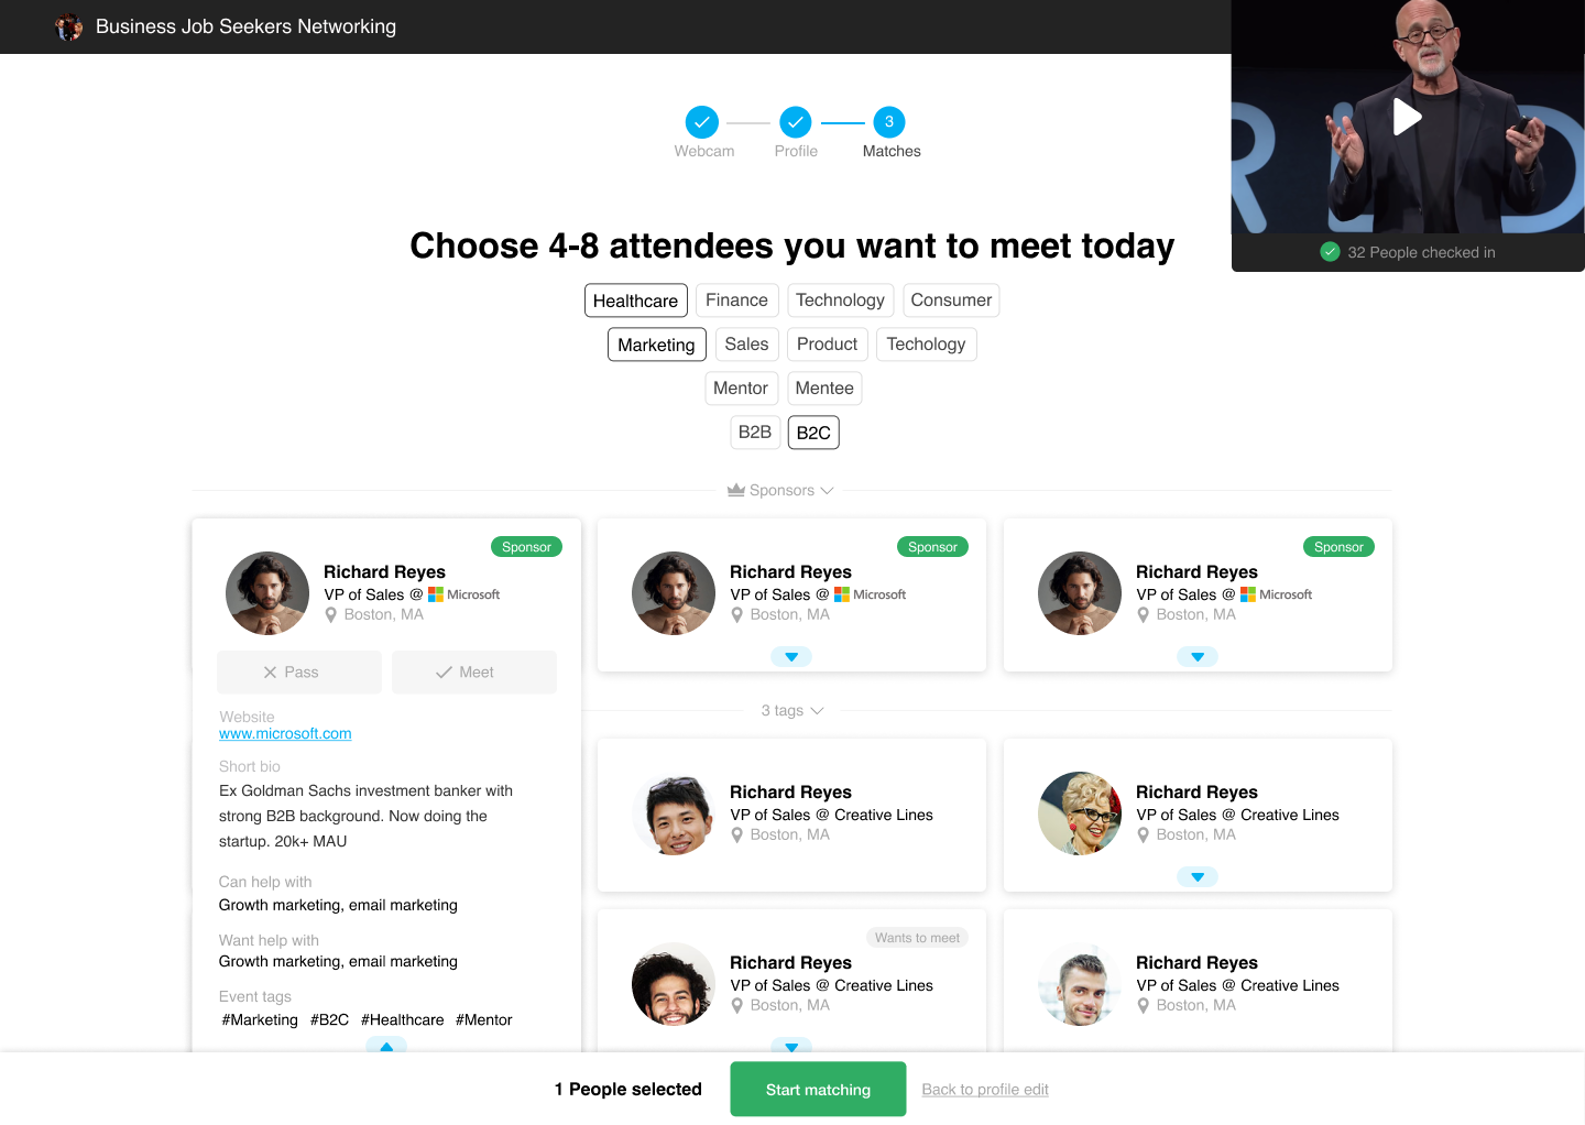 In addition to choosing tags, your audience can select the specific attendees they'd like to meet (or avoid).